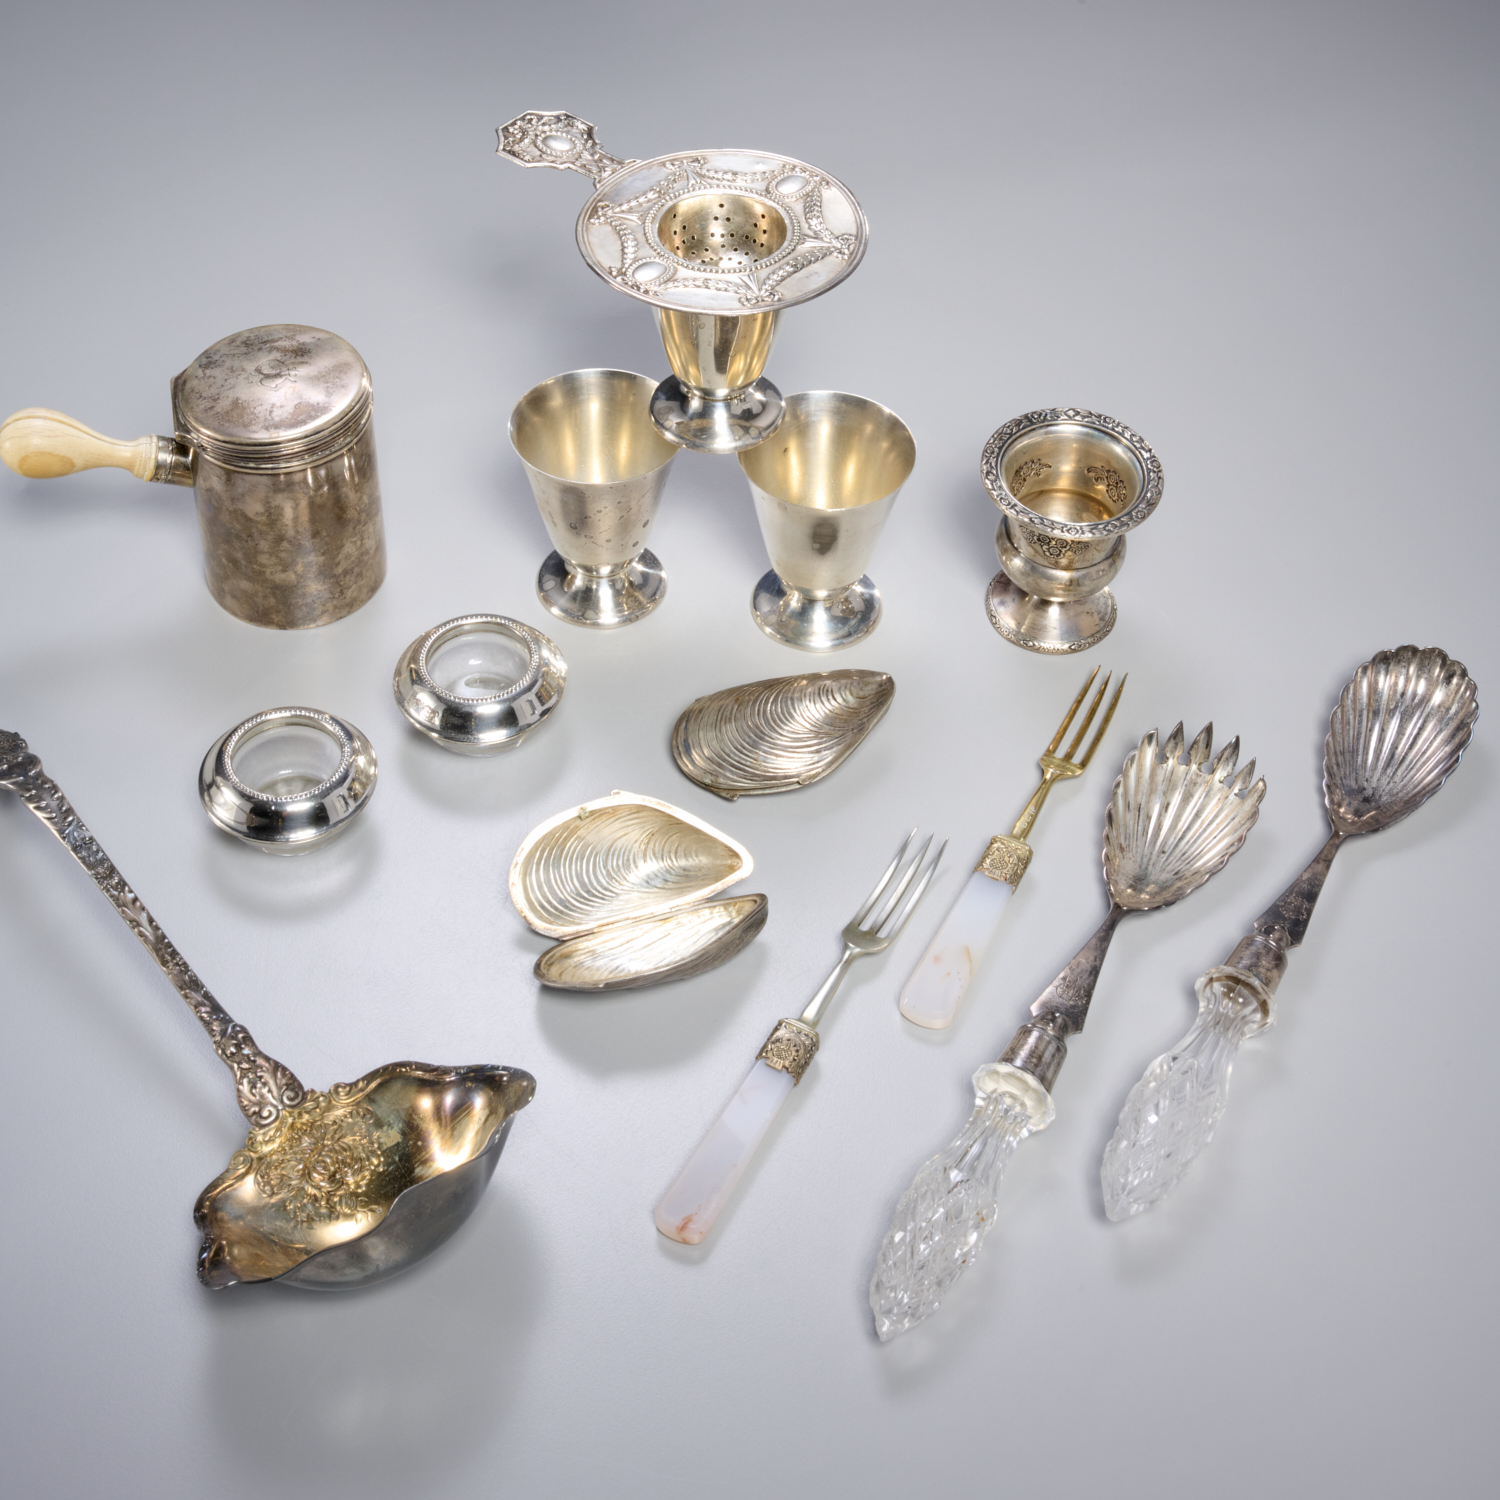  15 PIECE COLLECTION SILVER TABLEWARE 360255